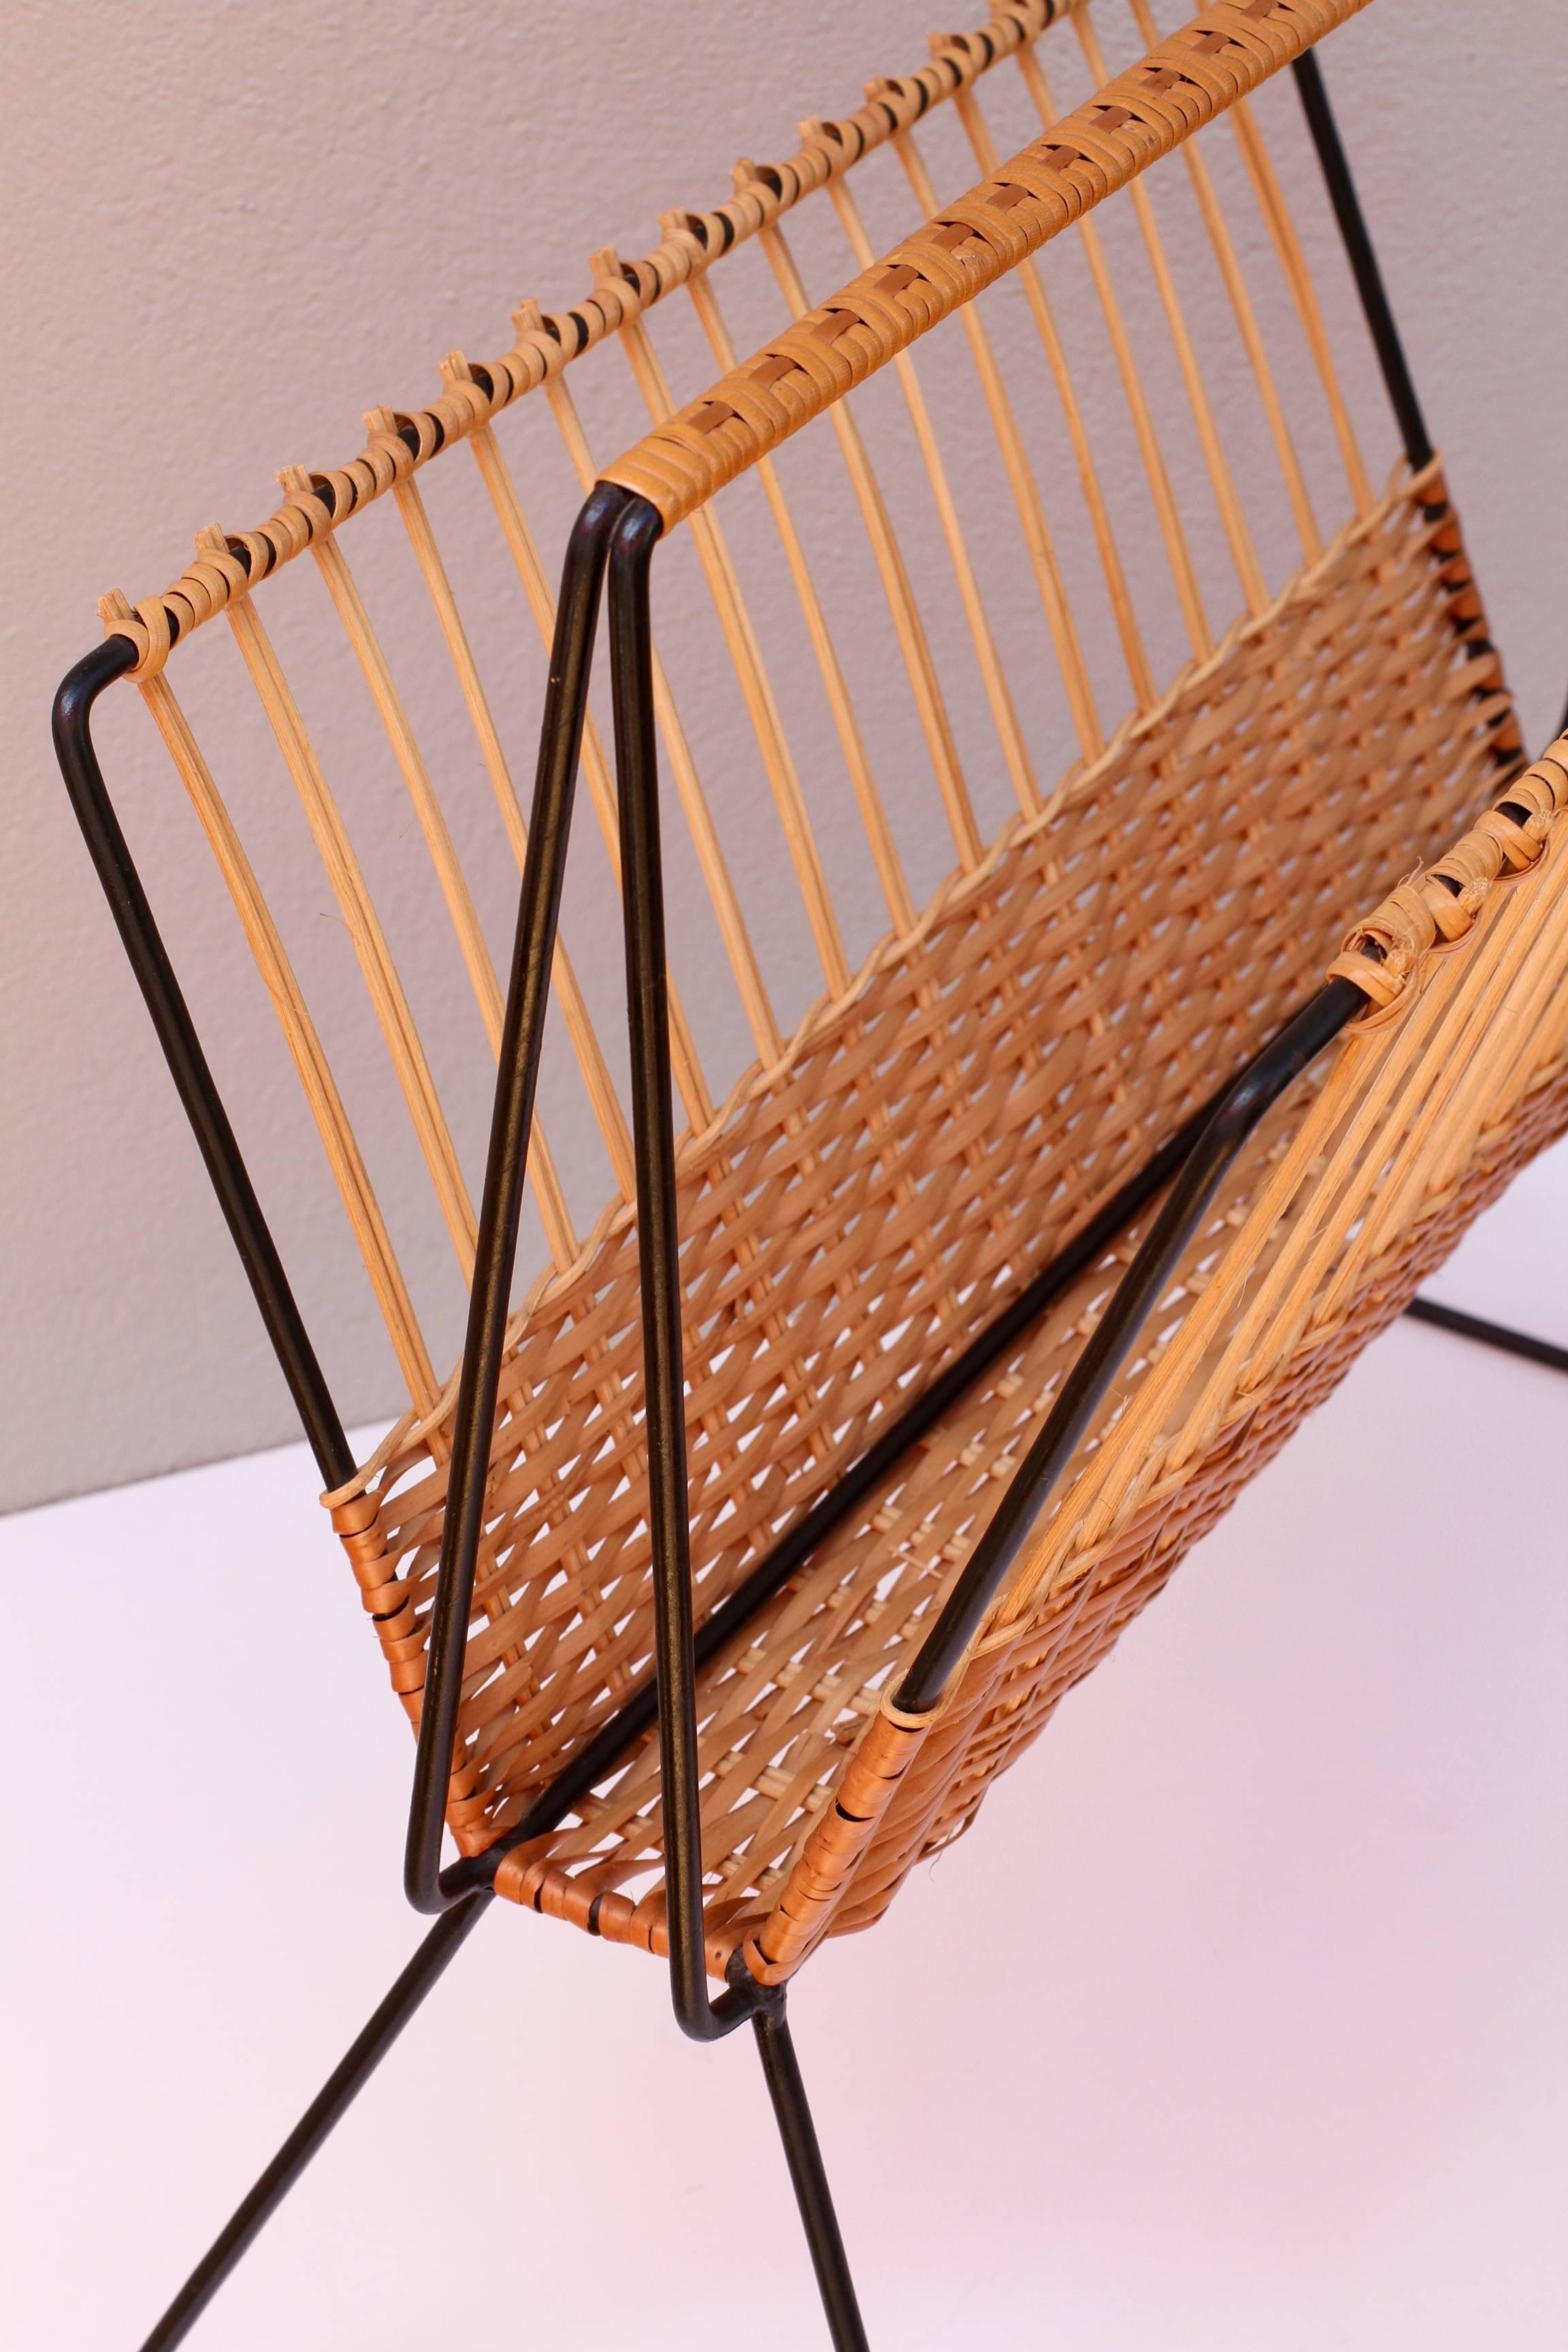 Mid-Century Modernist Wicker Magazine Rack Stand in the Style of Rohe Noordwolde (Rattan)